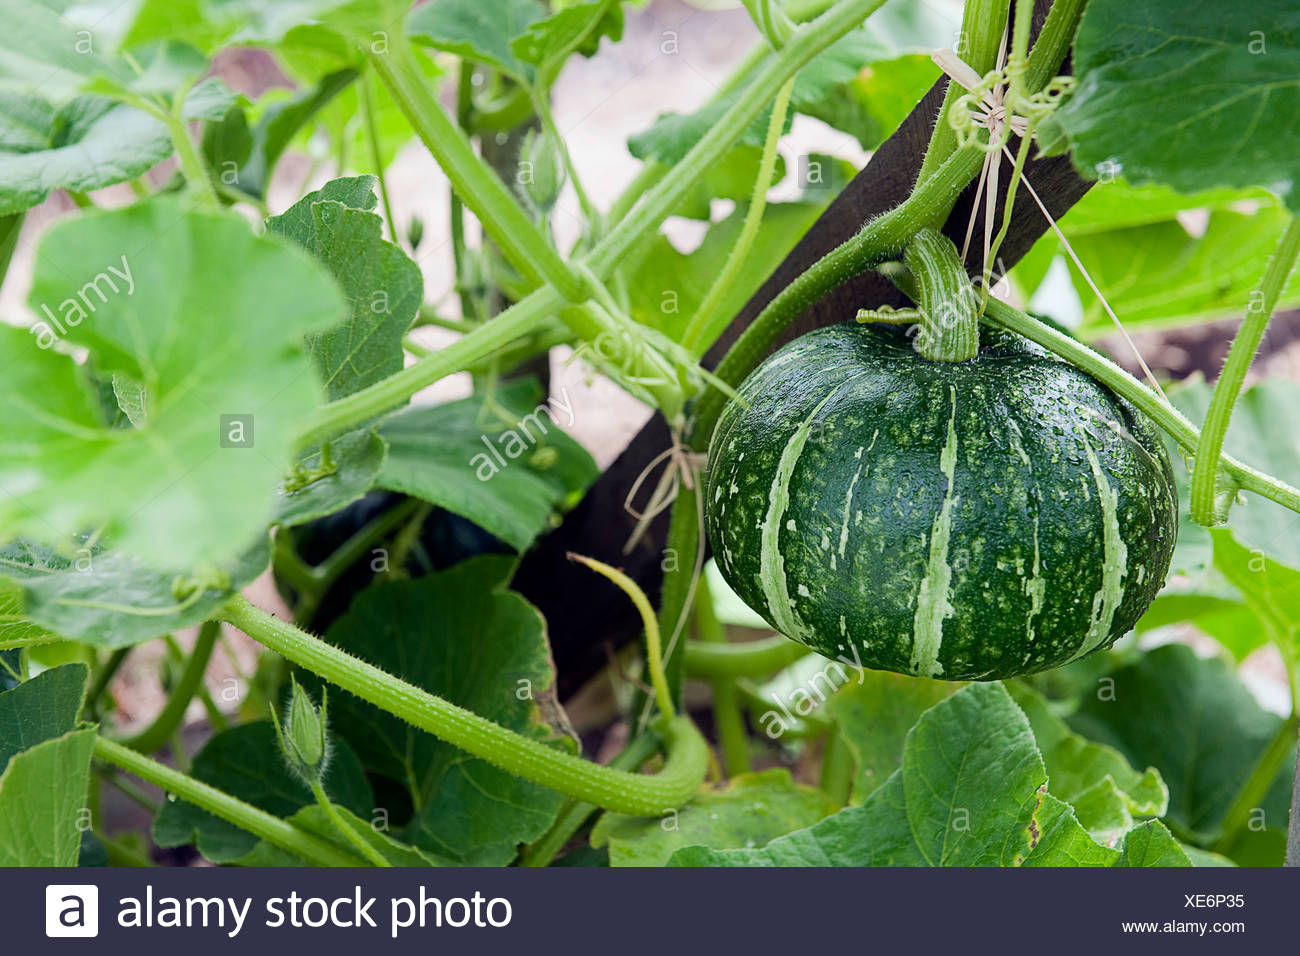 Kabocha Squash On Plant Stock Photo Alamy,Sausage Gravy And Biscuits